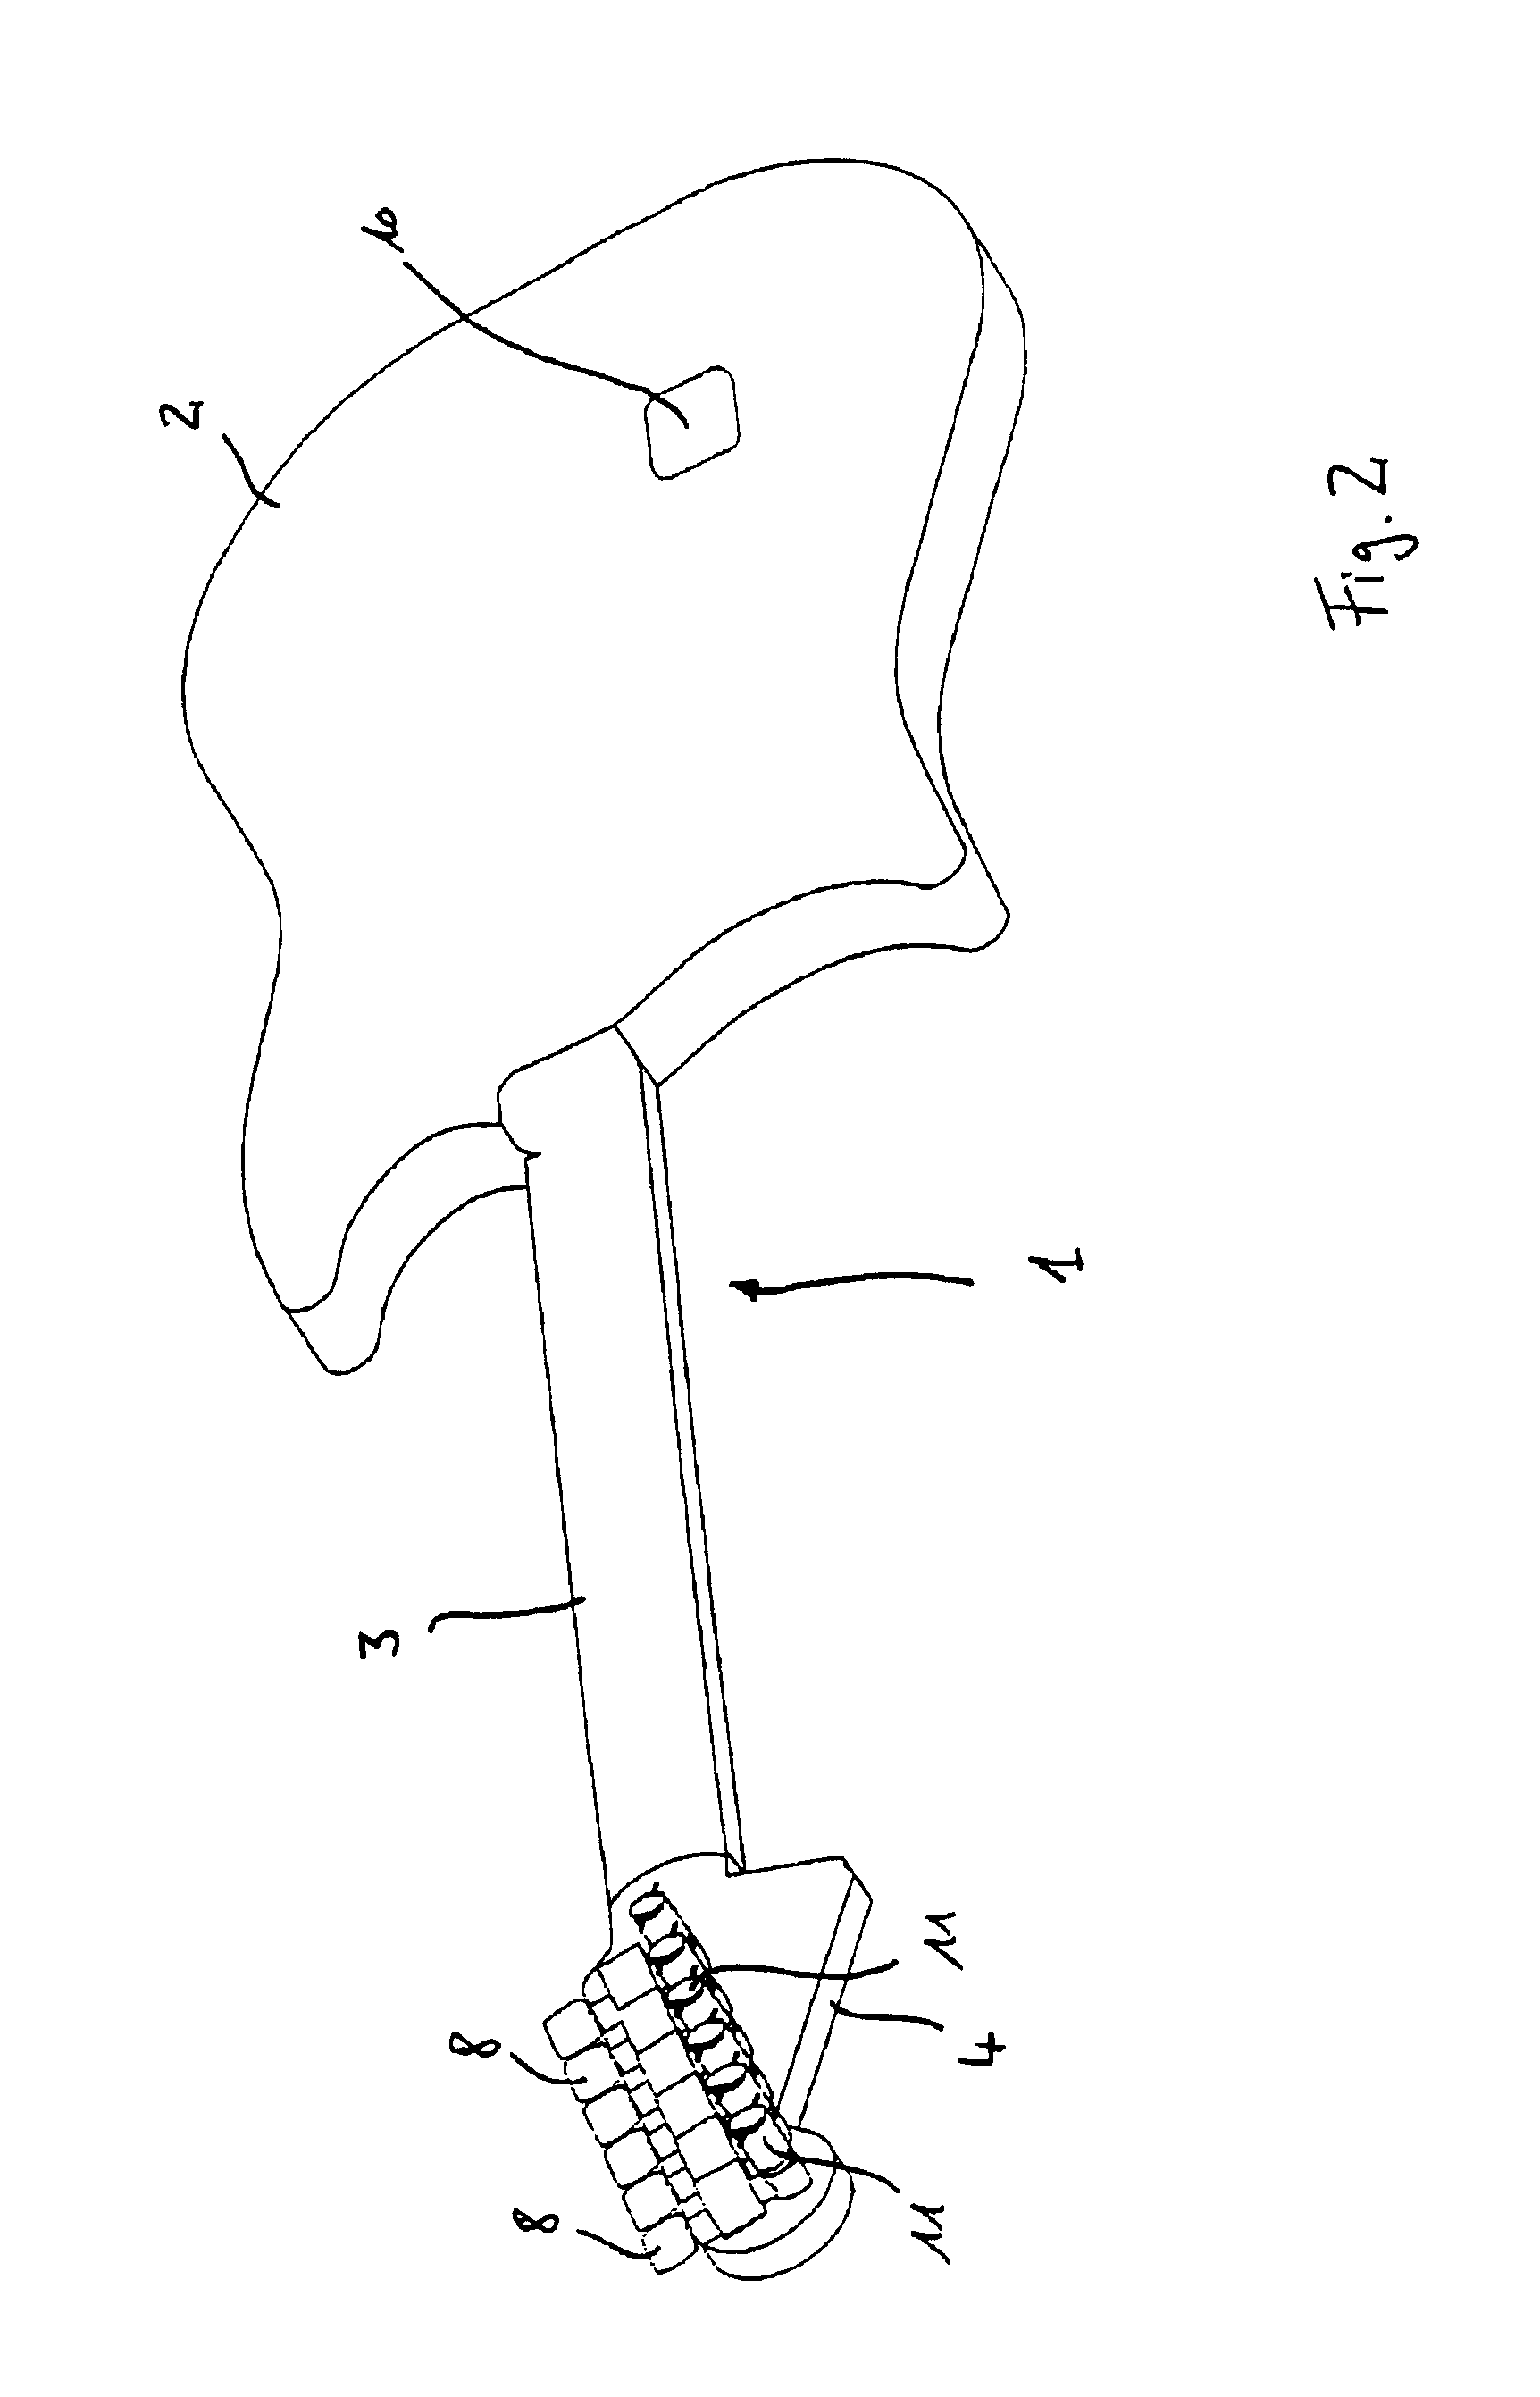 Device and method for automatic tuning of a string instrument in particular a guitar